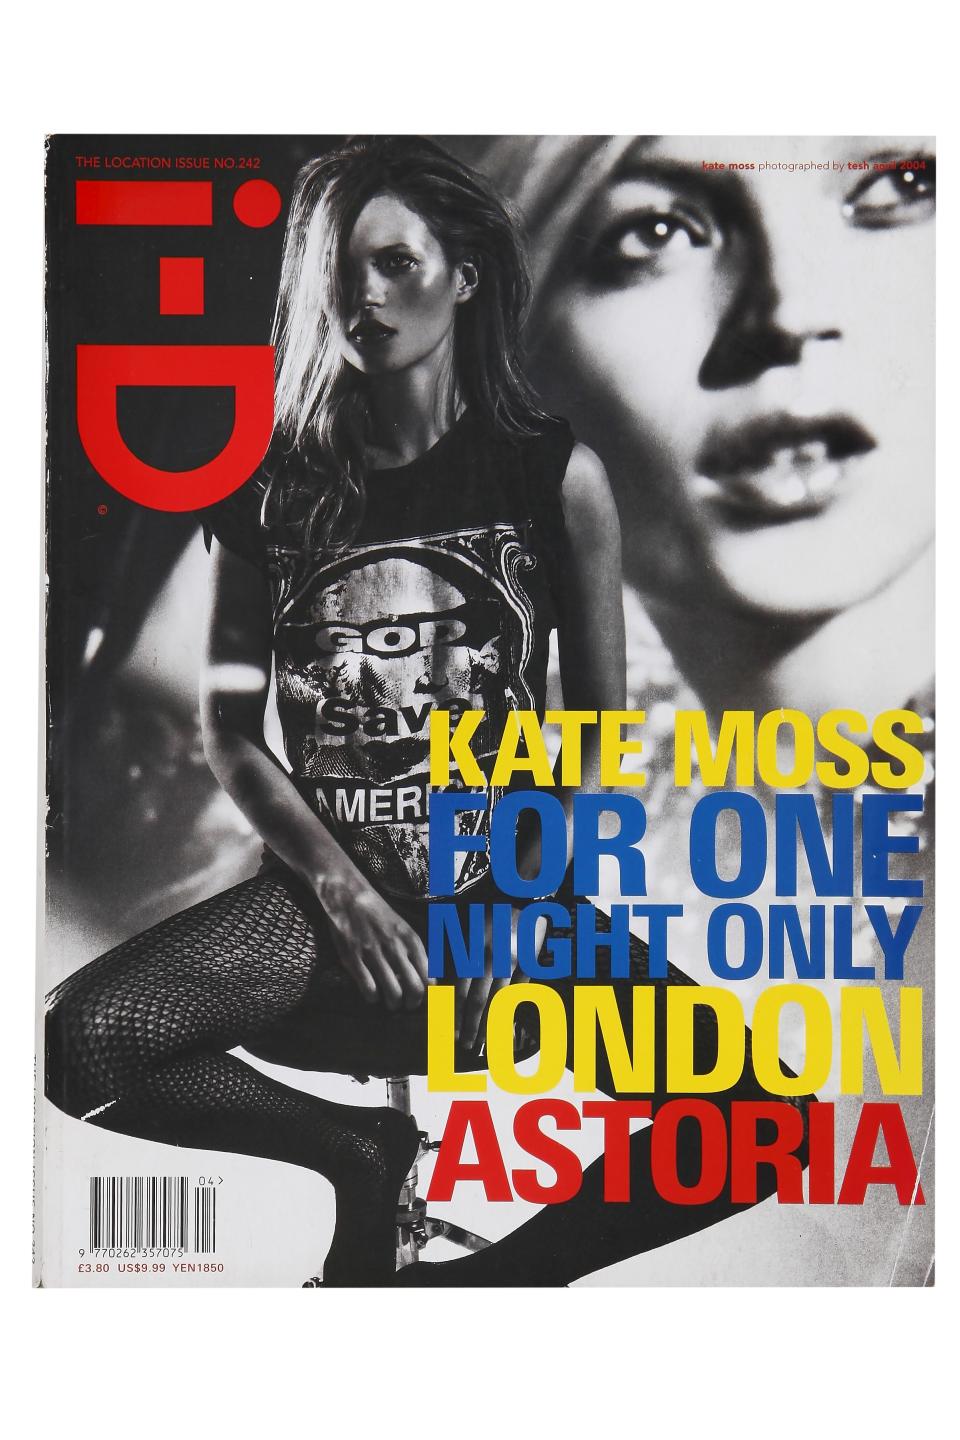 Kate Moss on the cover of the June issue of i-D magazine in 2004